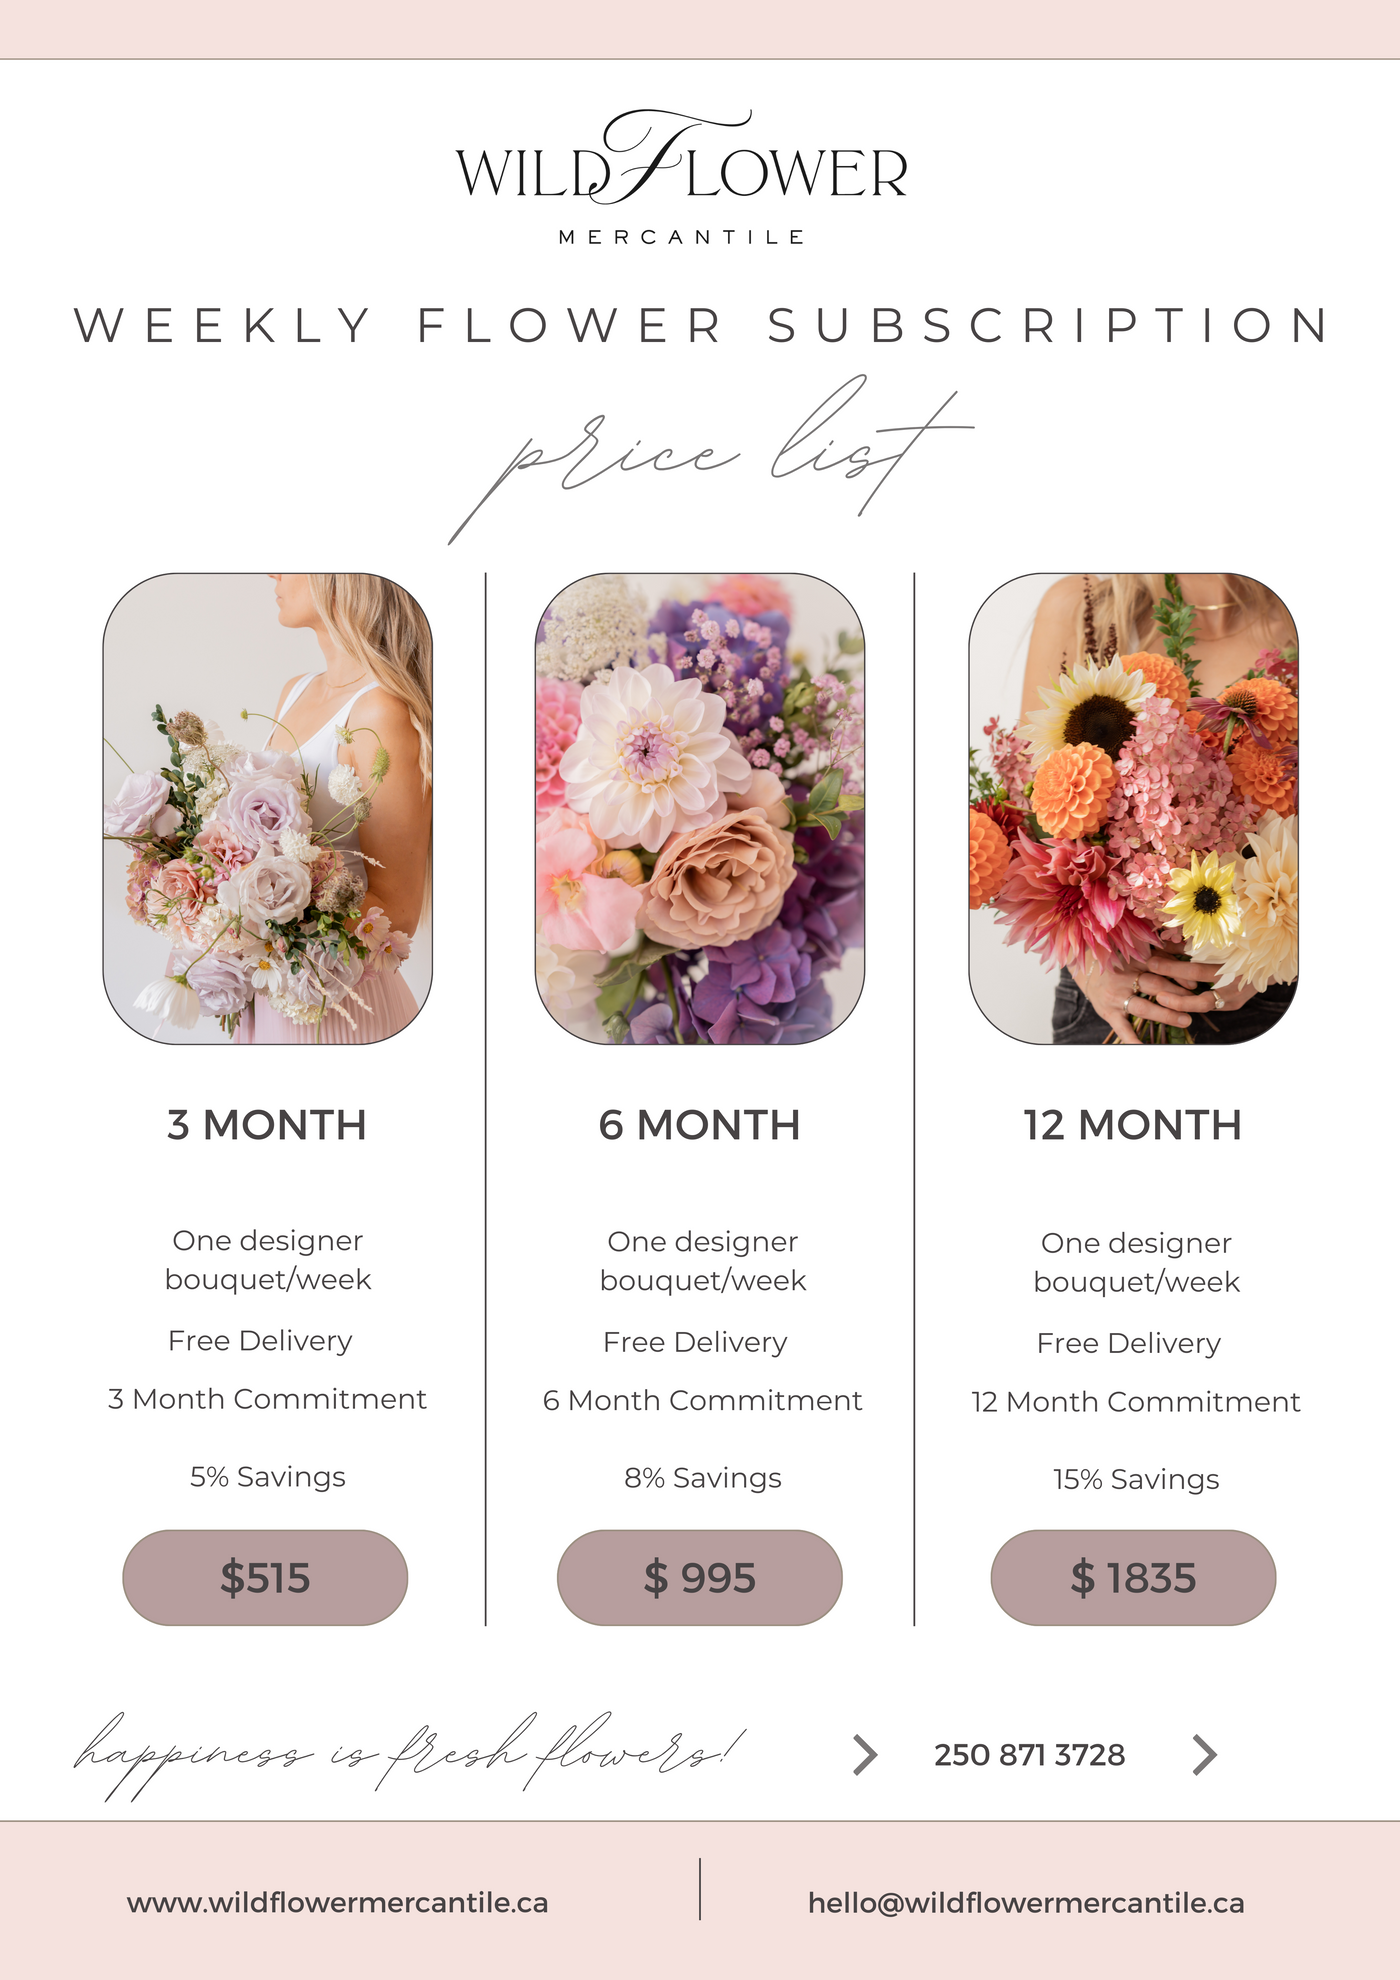 Business Flower Subscription Weekly